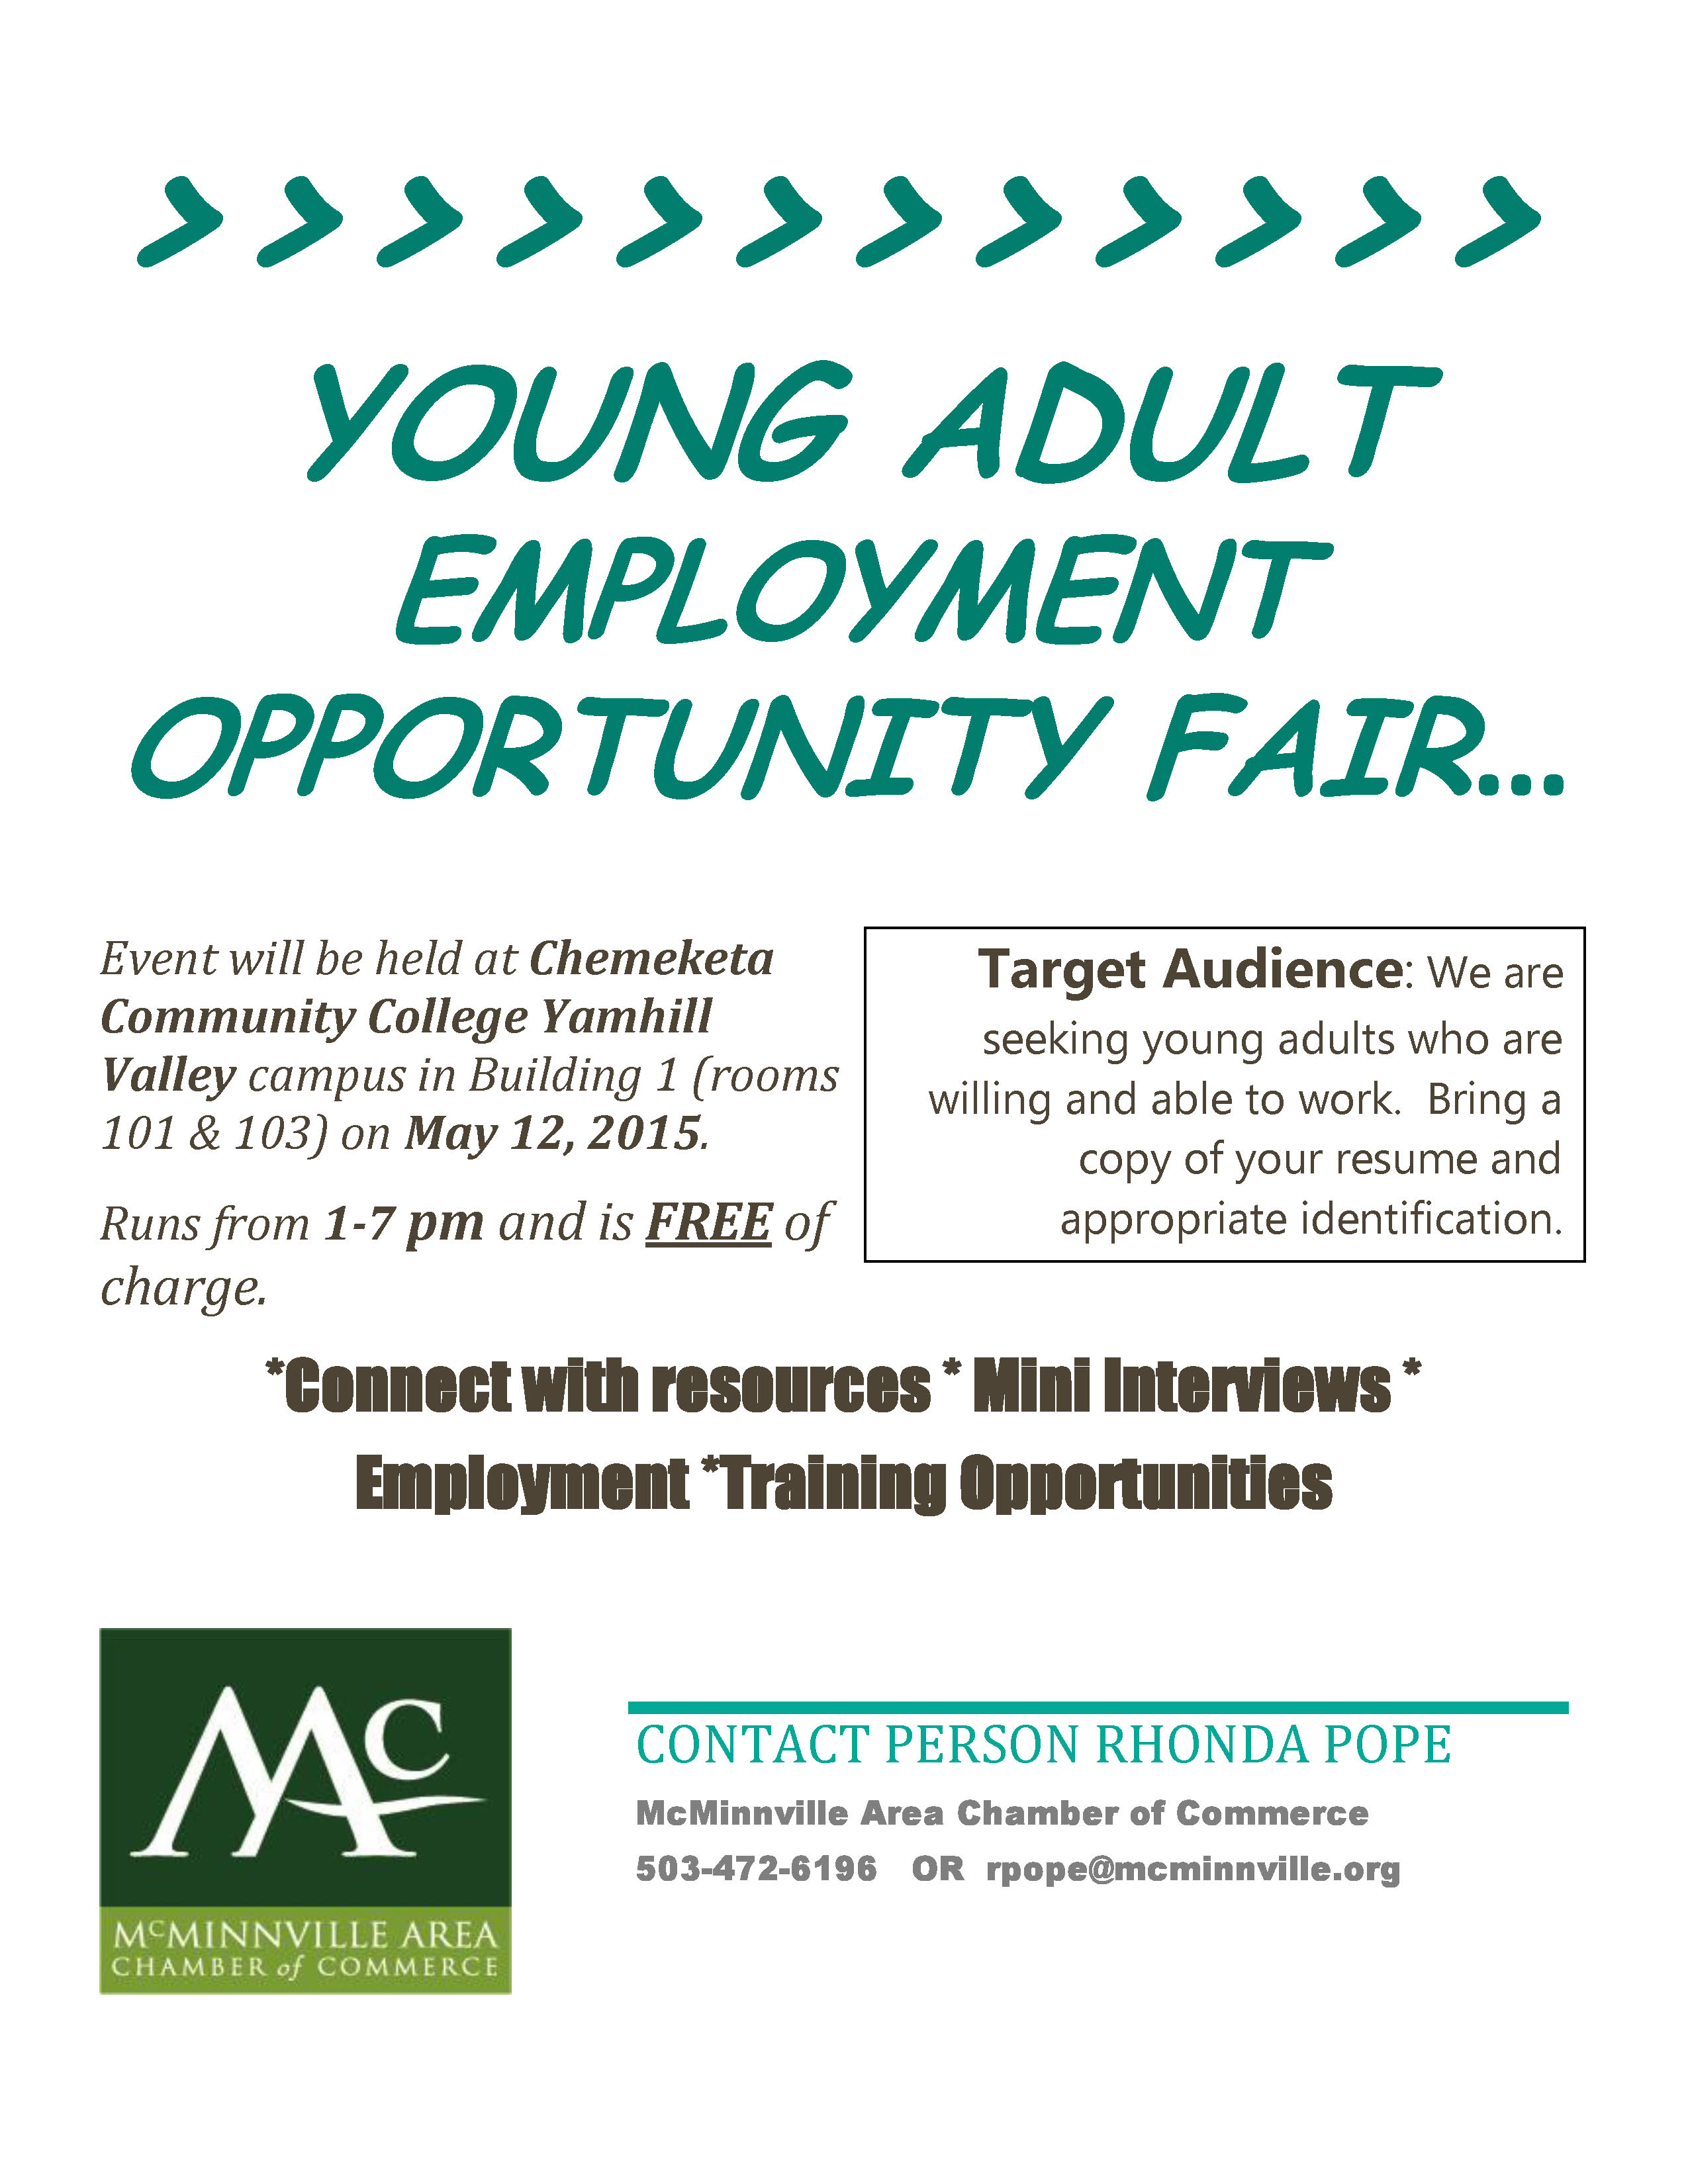 McMinnville Young Adult Fair 5-12-15